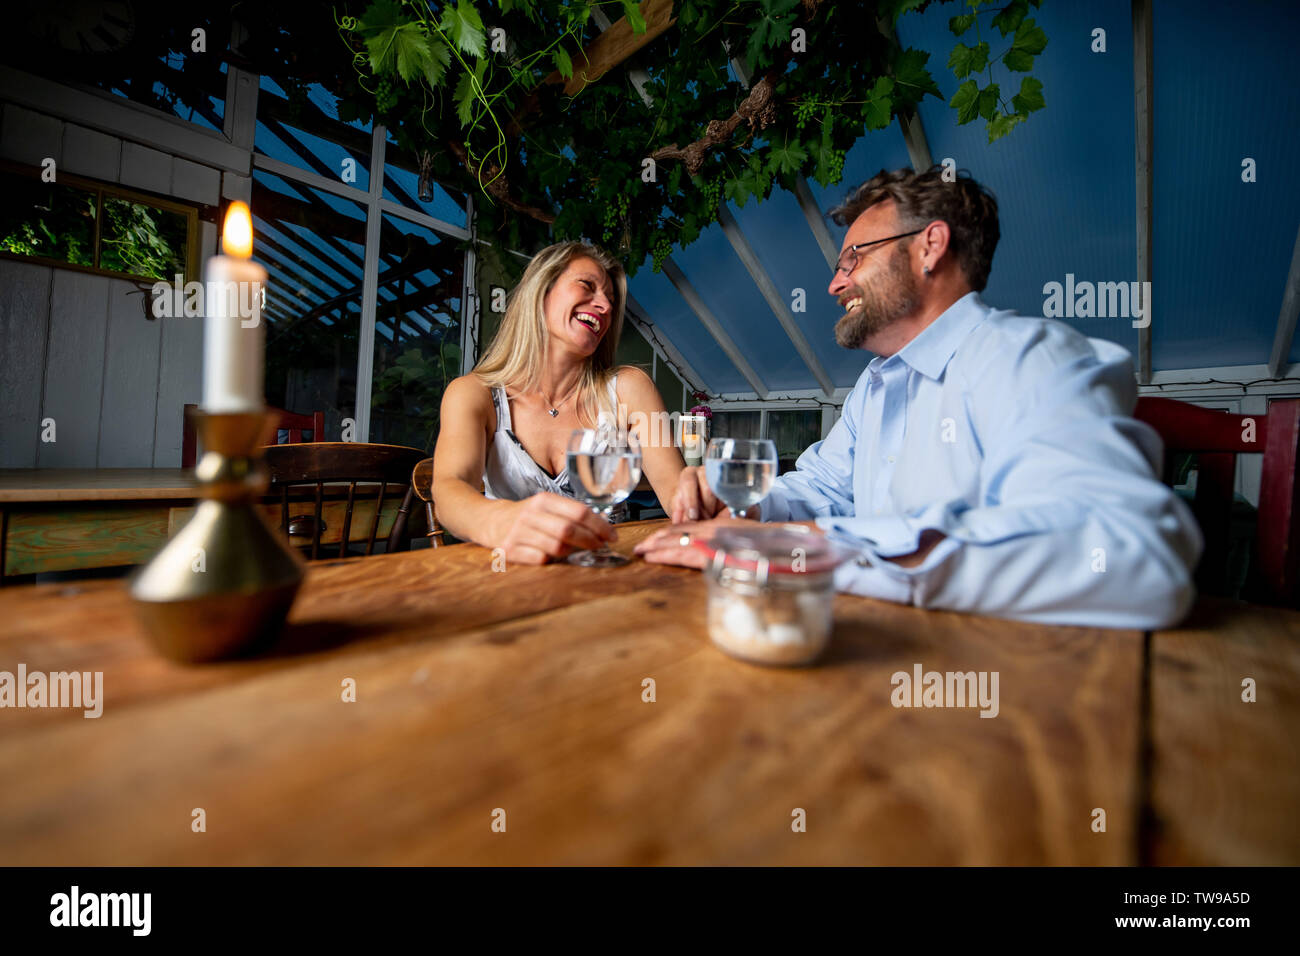 Couple sit together relaxing at a table Stock Photo